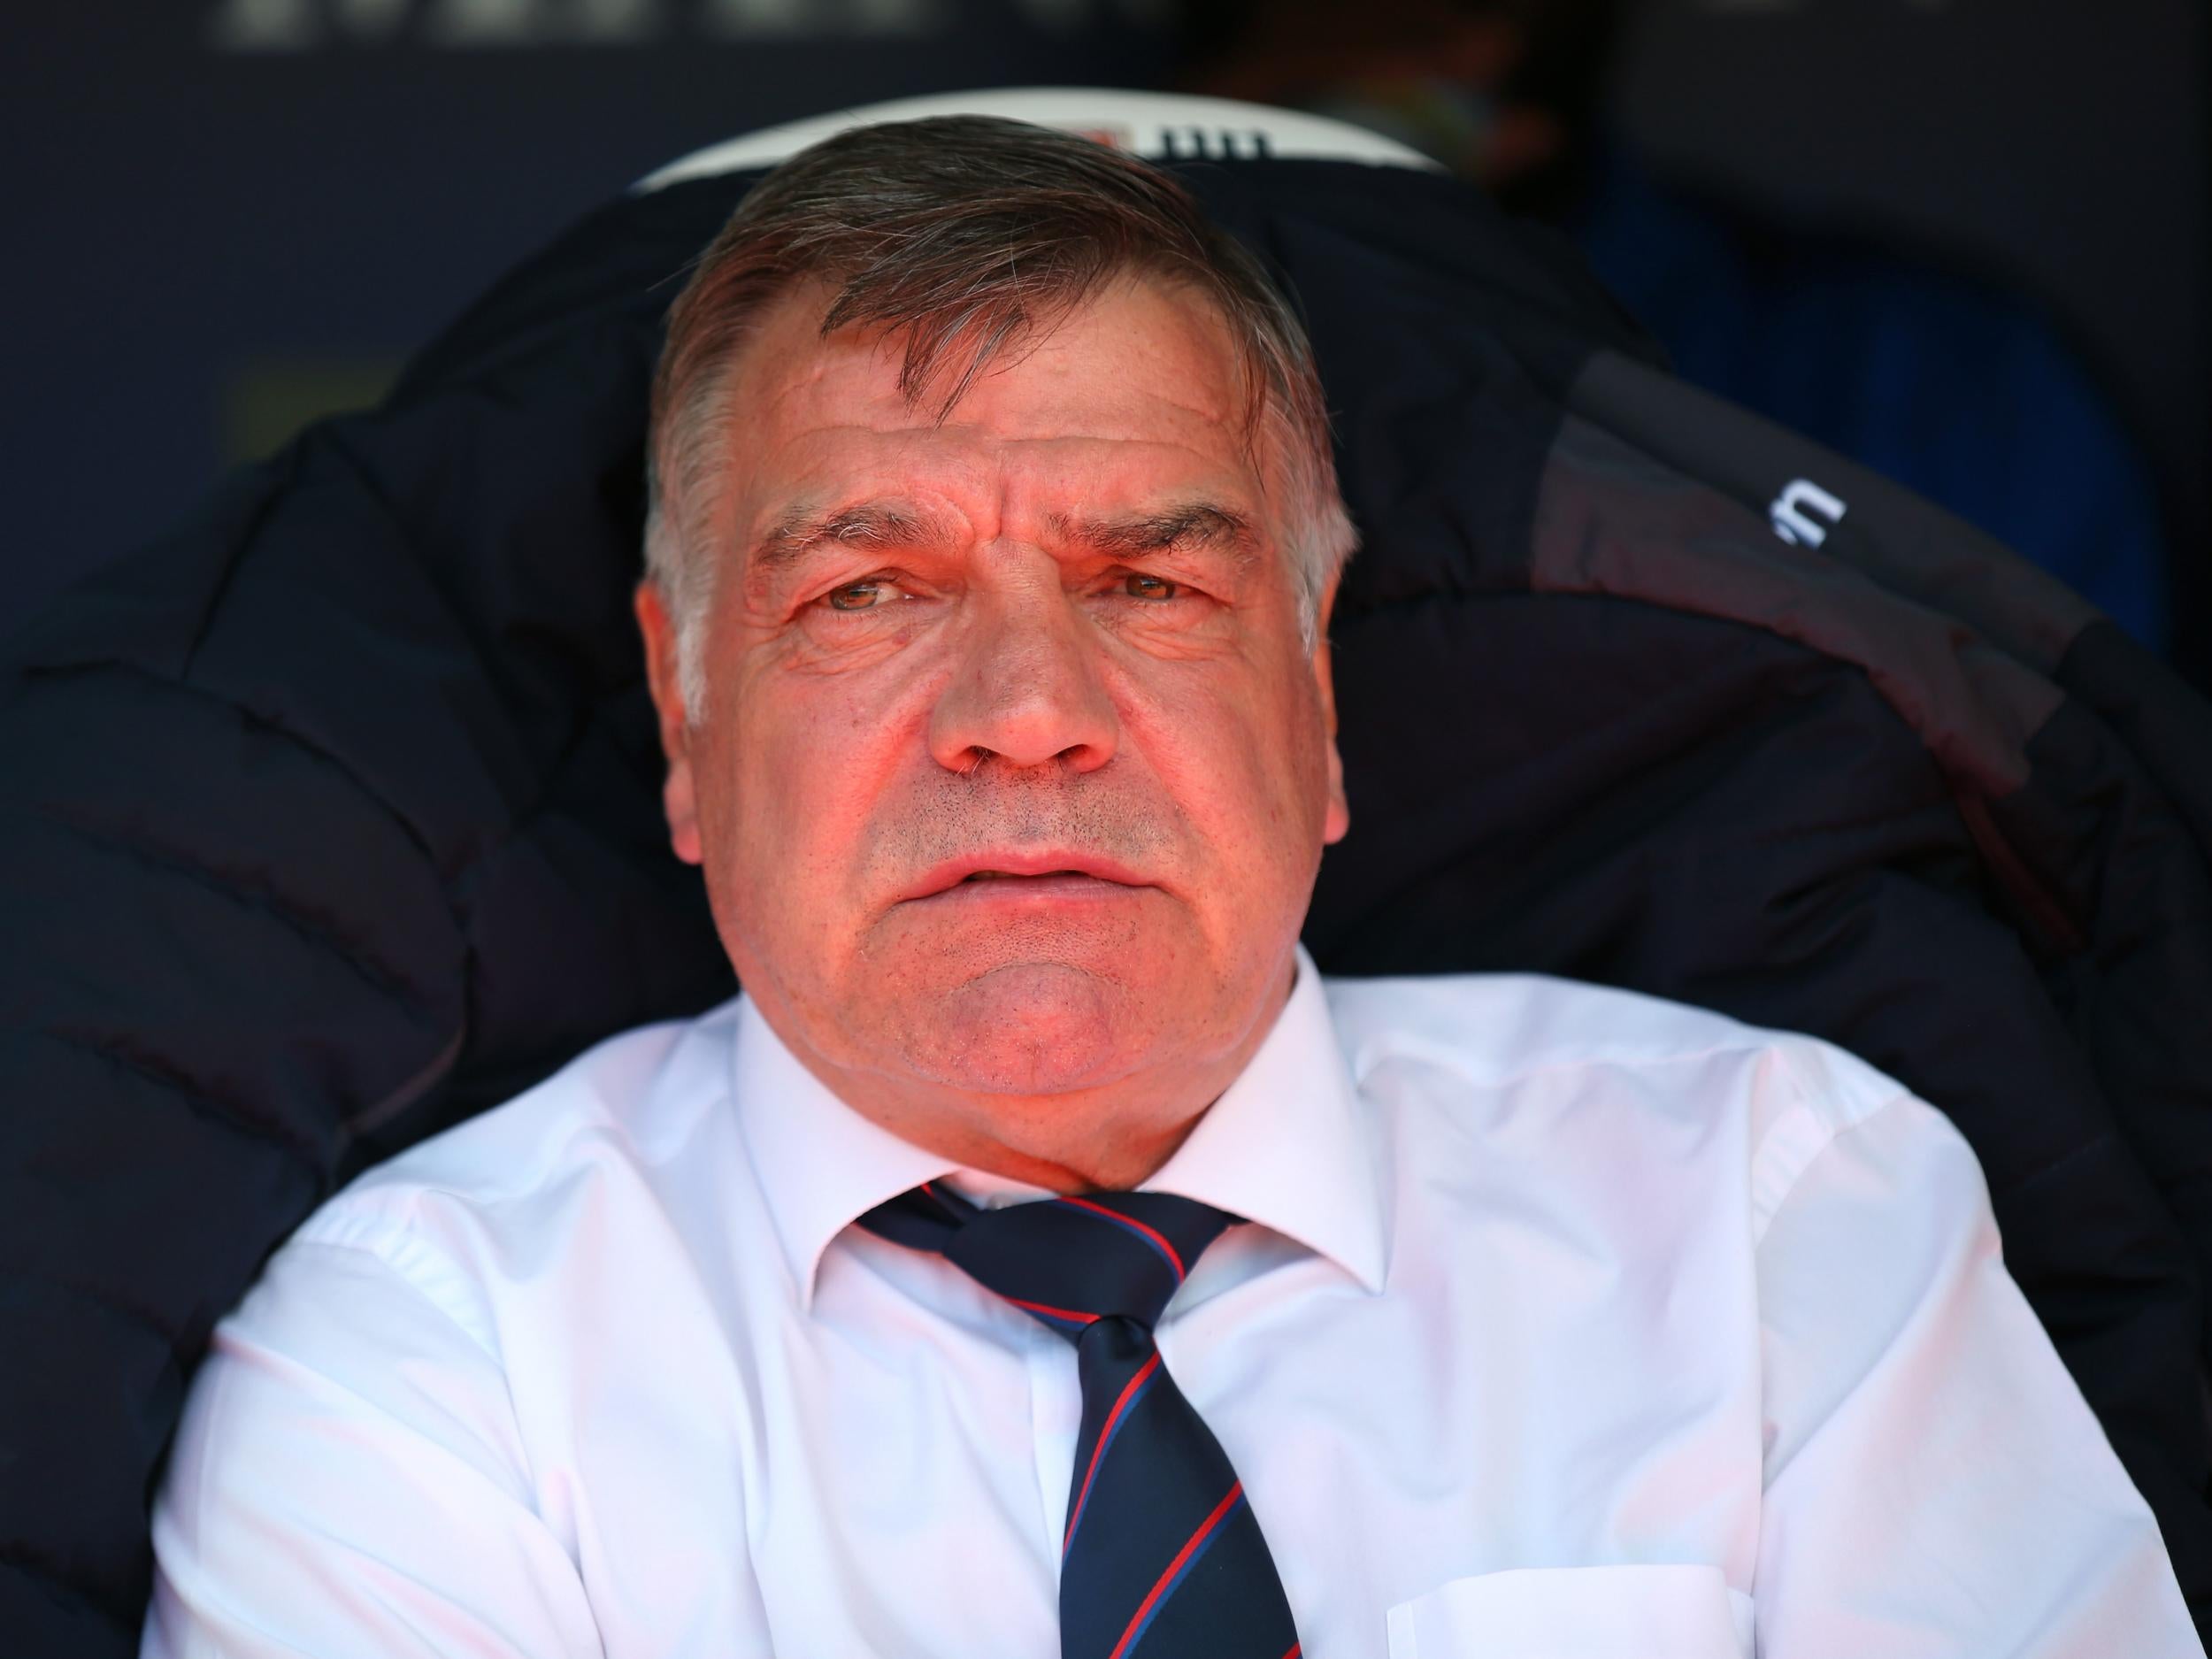 Allardyce left Palace in May but admitted he would have to think about the Everton vacancy